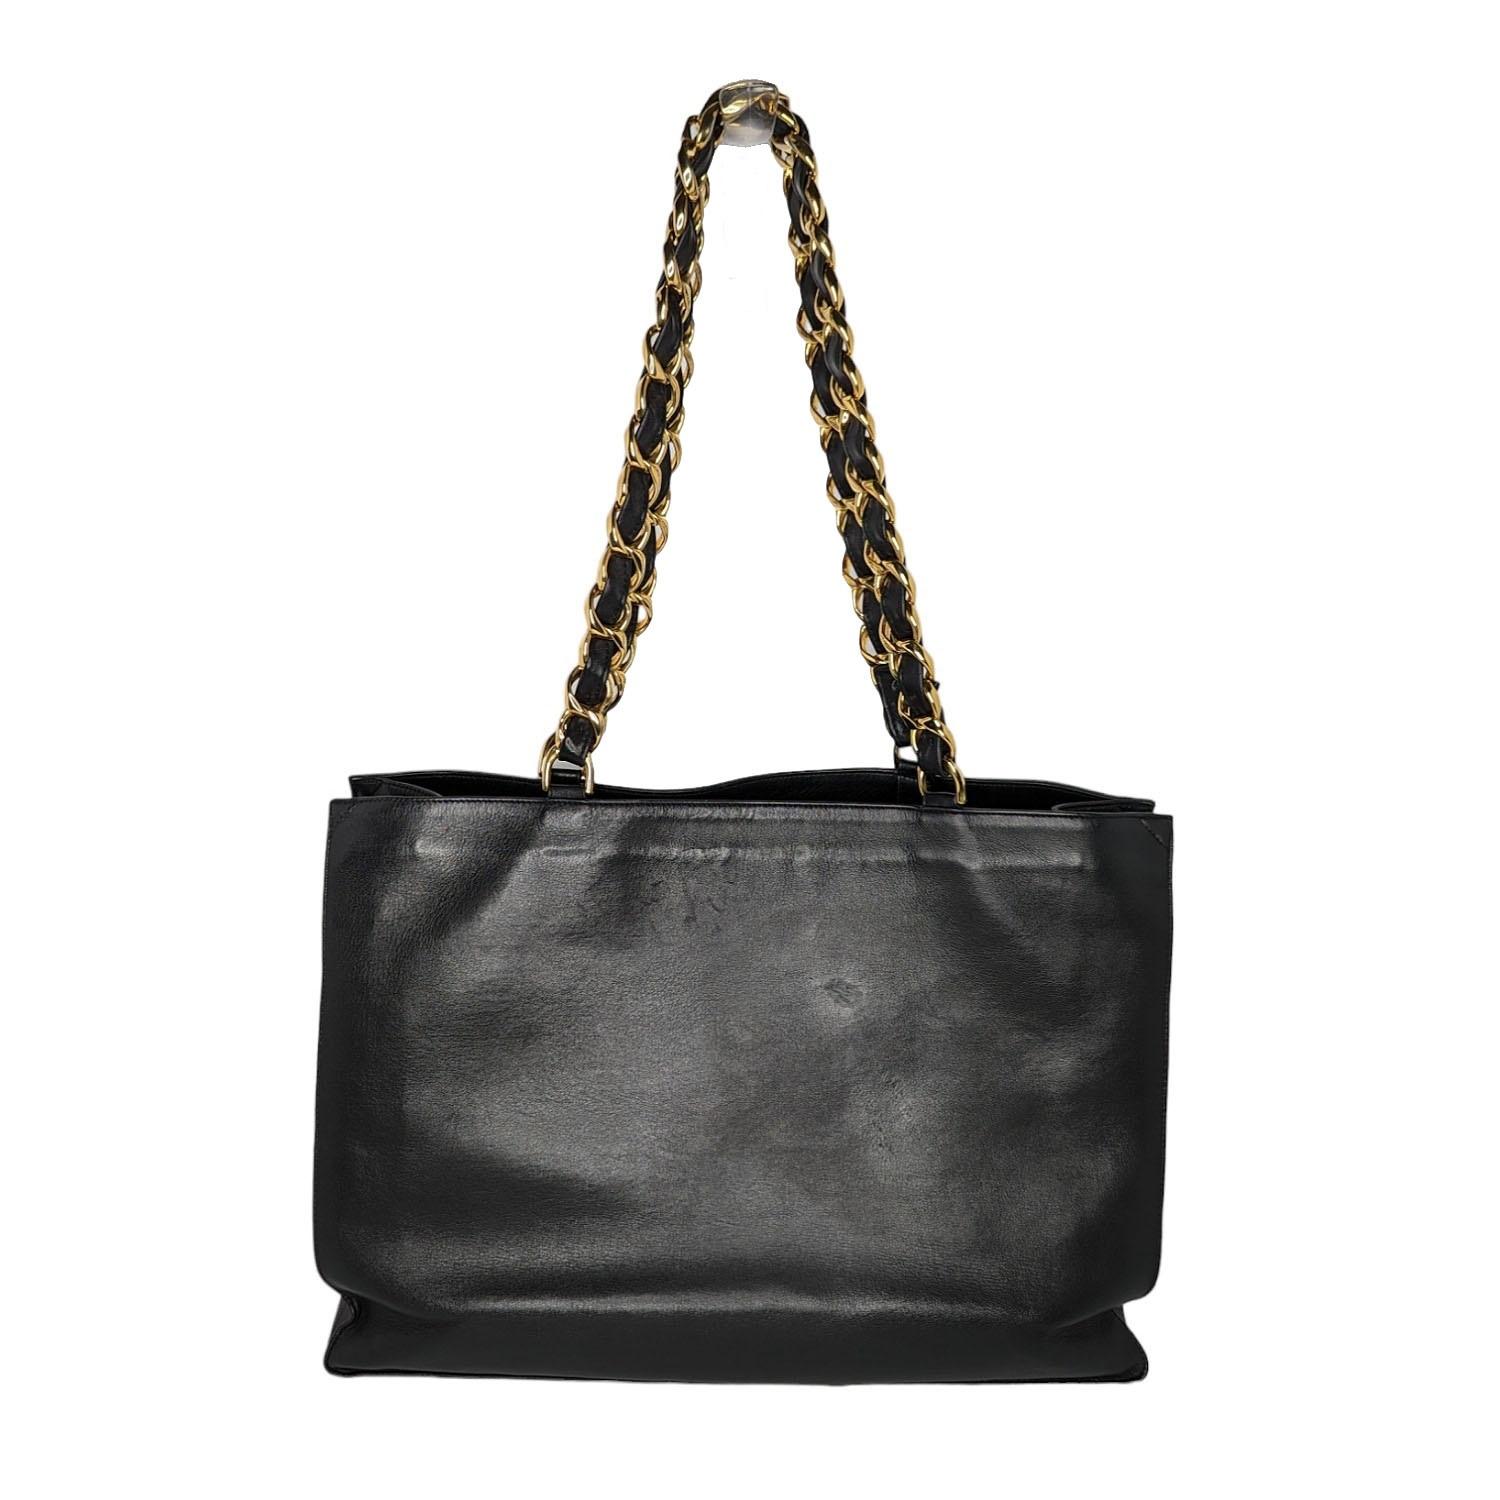 Chanel Vintage CC Chain Shopper Tote. This stunning tote, circa 90s, is crafted of luxuriously smooth Calfskin leather in black. The bag features a large, stitched CC quilted logo and leather threaded chain link straps. The top opens to a black